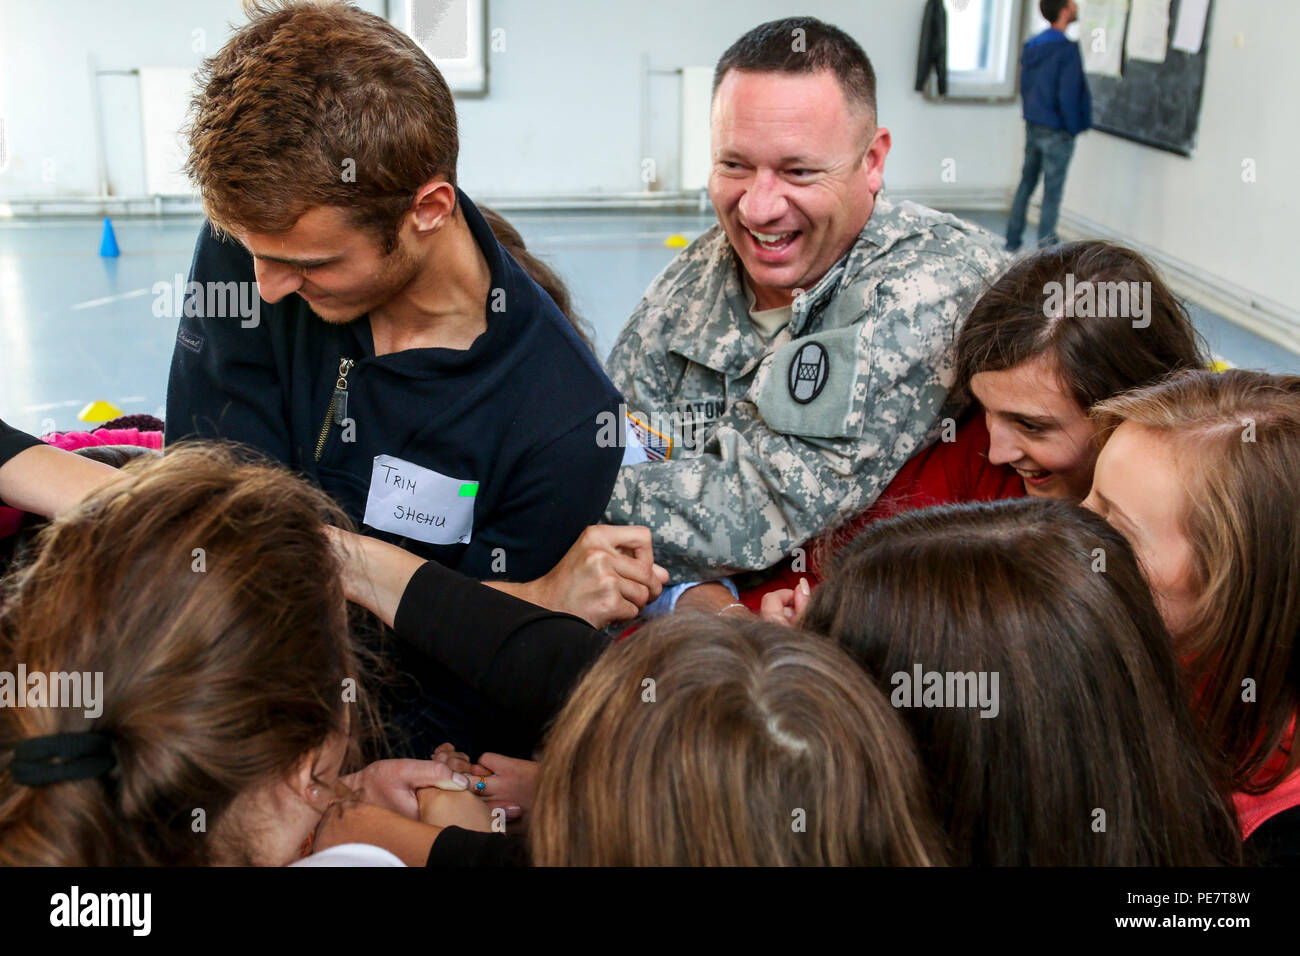 Capt. Jonathan Laton, a North Carolina National Guard Soldier deployed to Kosovo with the 30th Armored Brigade Combat Team headquarters, laughs alongside a group of students while leading them in a game called The Human Knot, during an Oct. 17, 2015, Violence Free Future youth tolerance event in Kacanik, Kosovo. During the game, the participants to used teamwork and communication skills to untangle themselves without letting go of each other’s hands. Laton and several other members of Multinational Battle Group-East volunteered their free time to lead this and other games used to simulate real Stock Photo